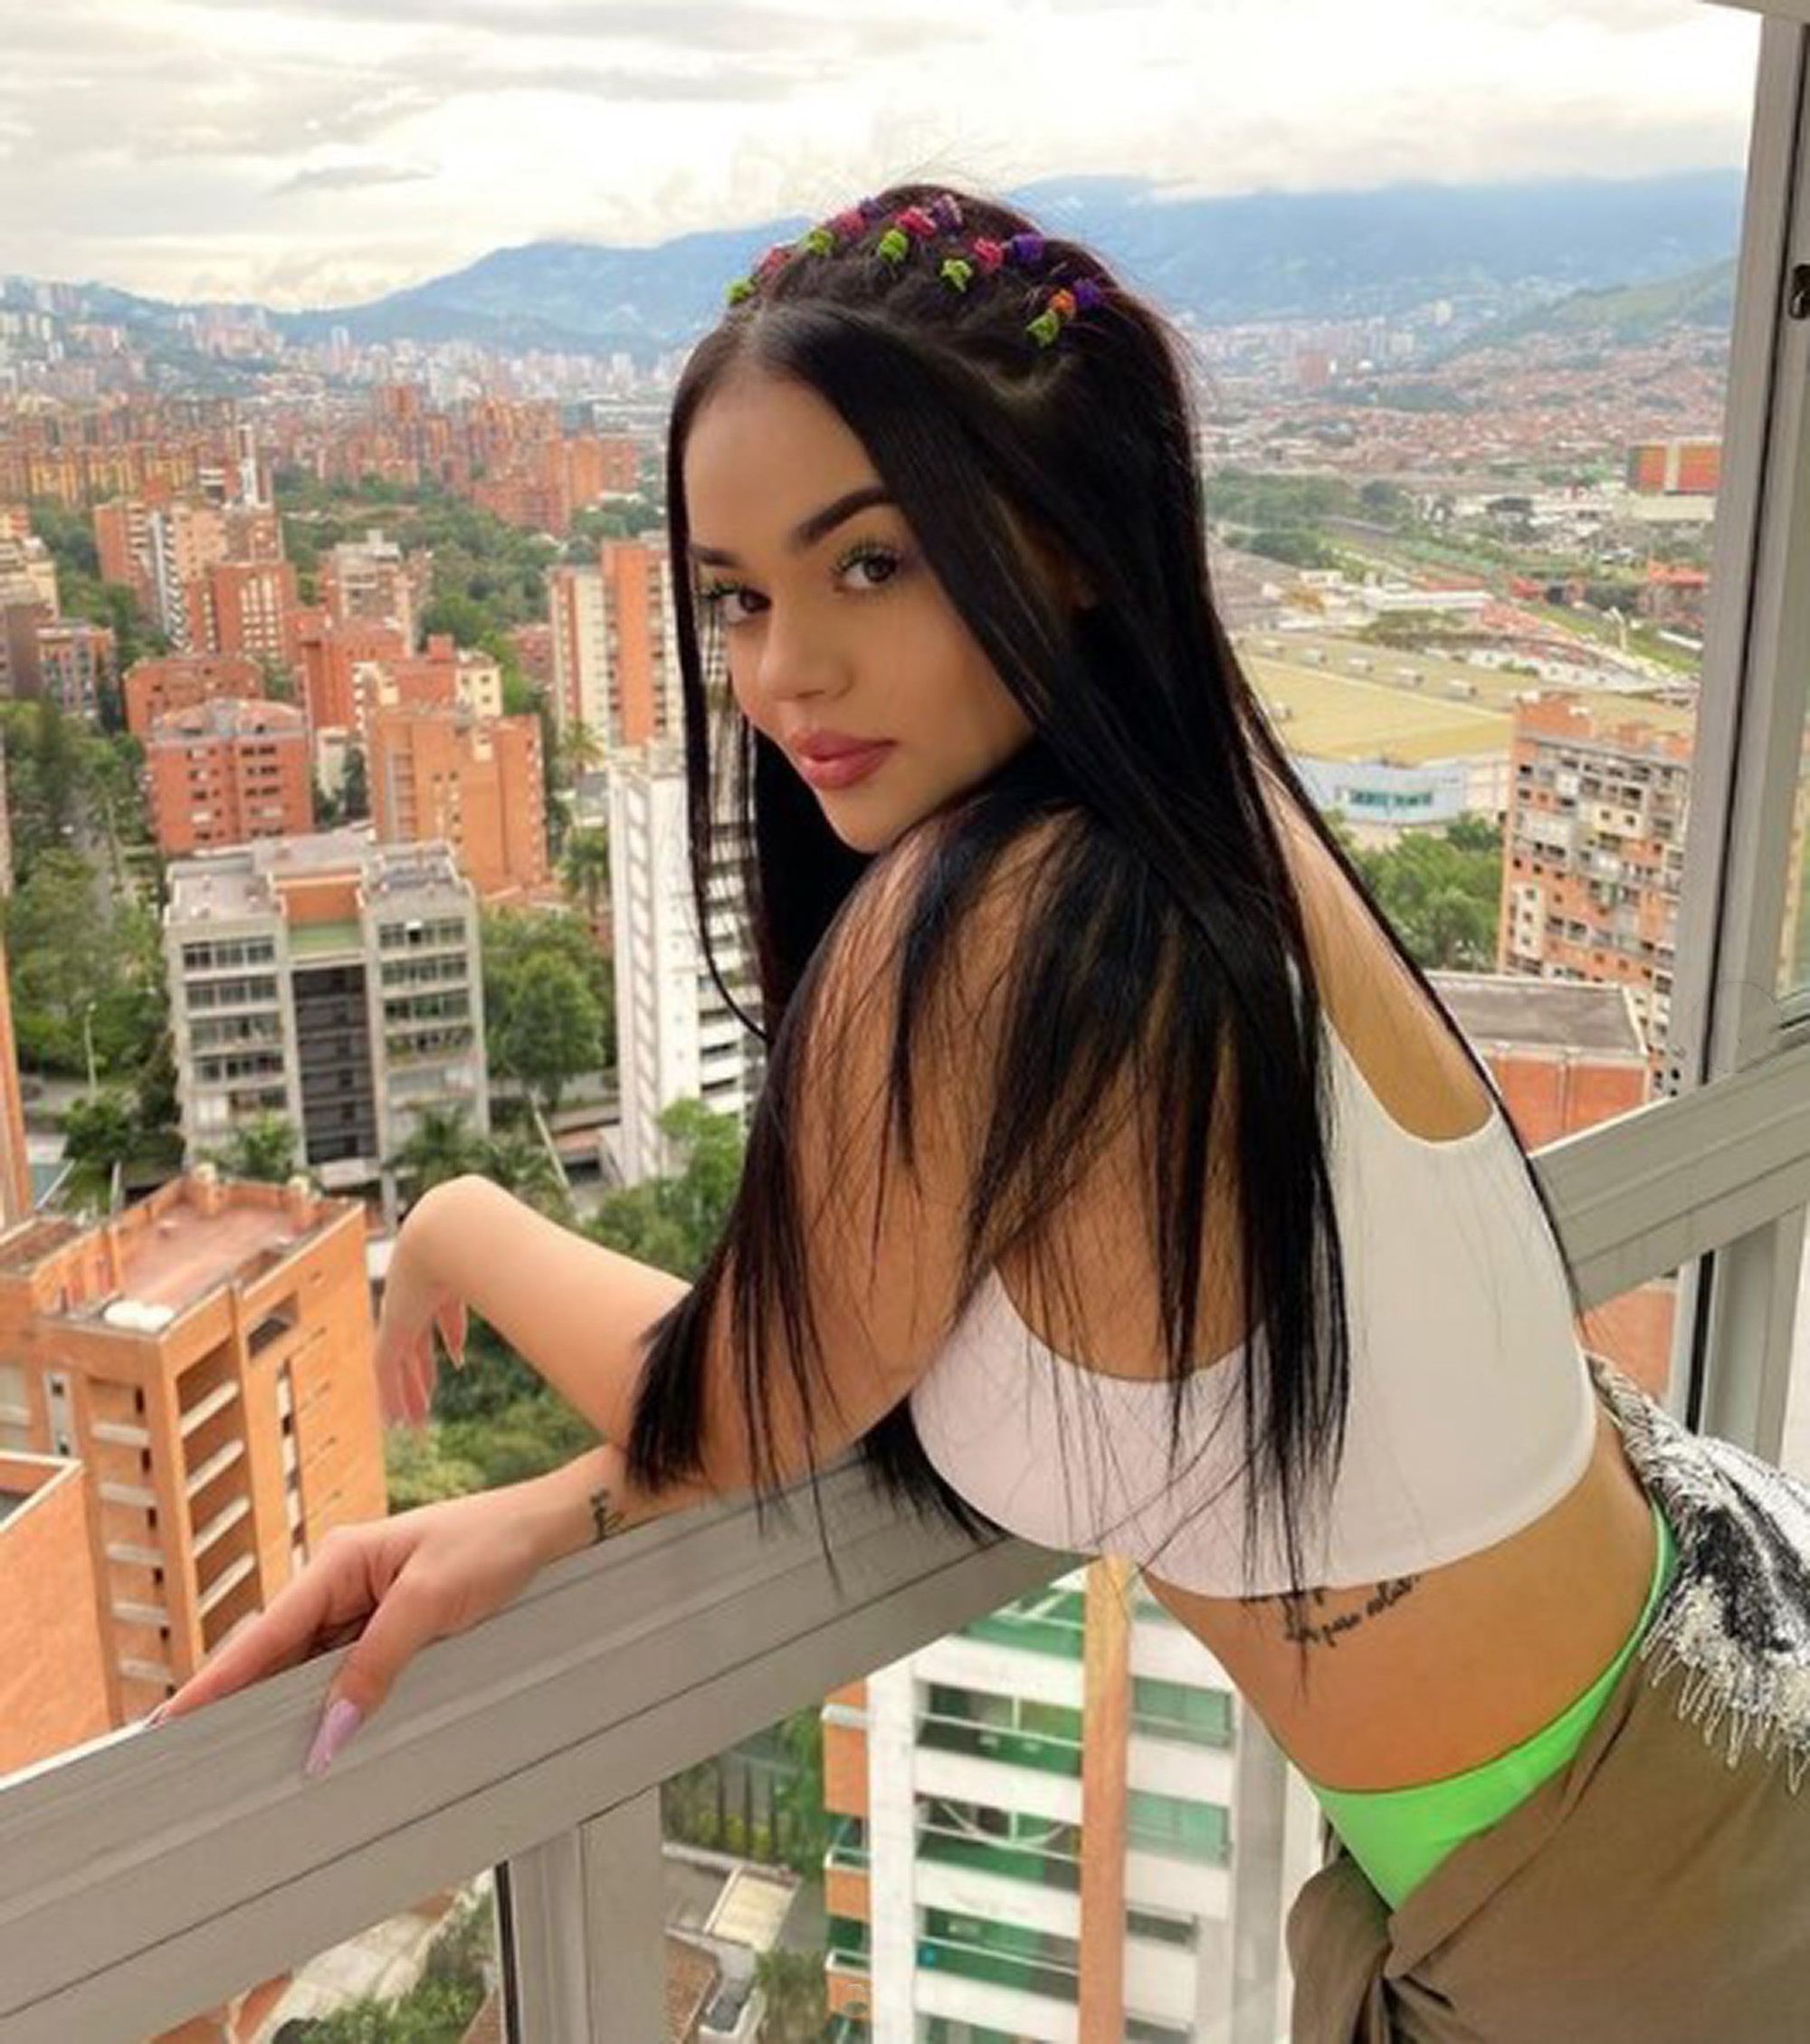 Read more about the article Curvy Colombian Influencer Reveals She Suffers With Severe Panic Attacks